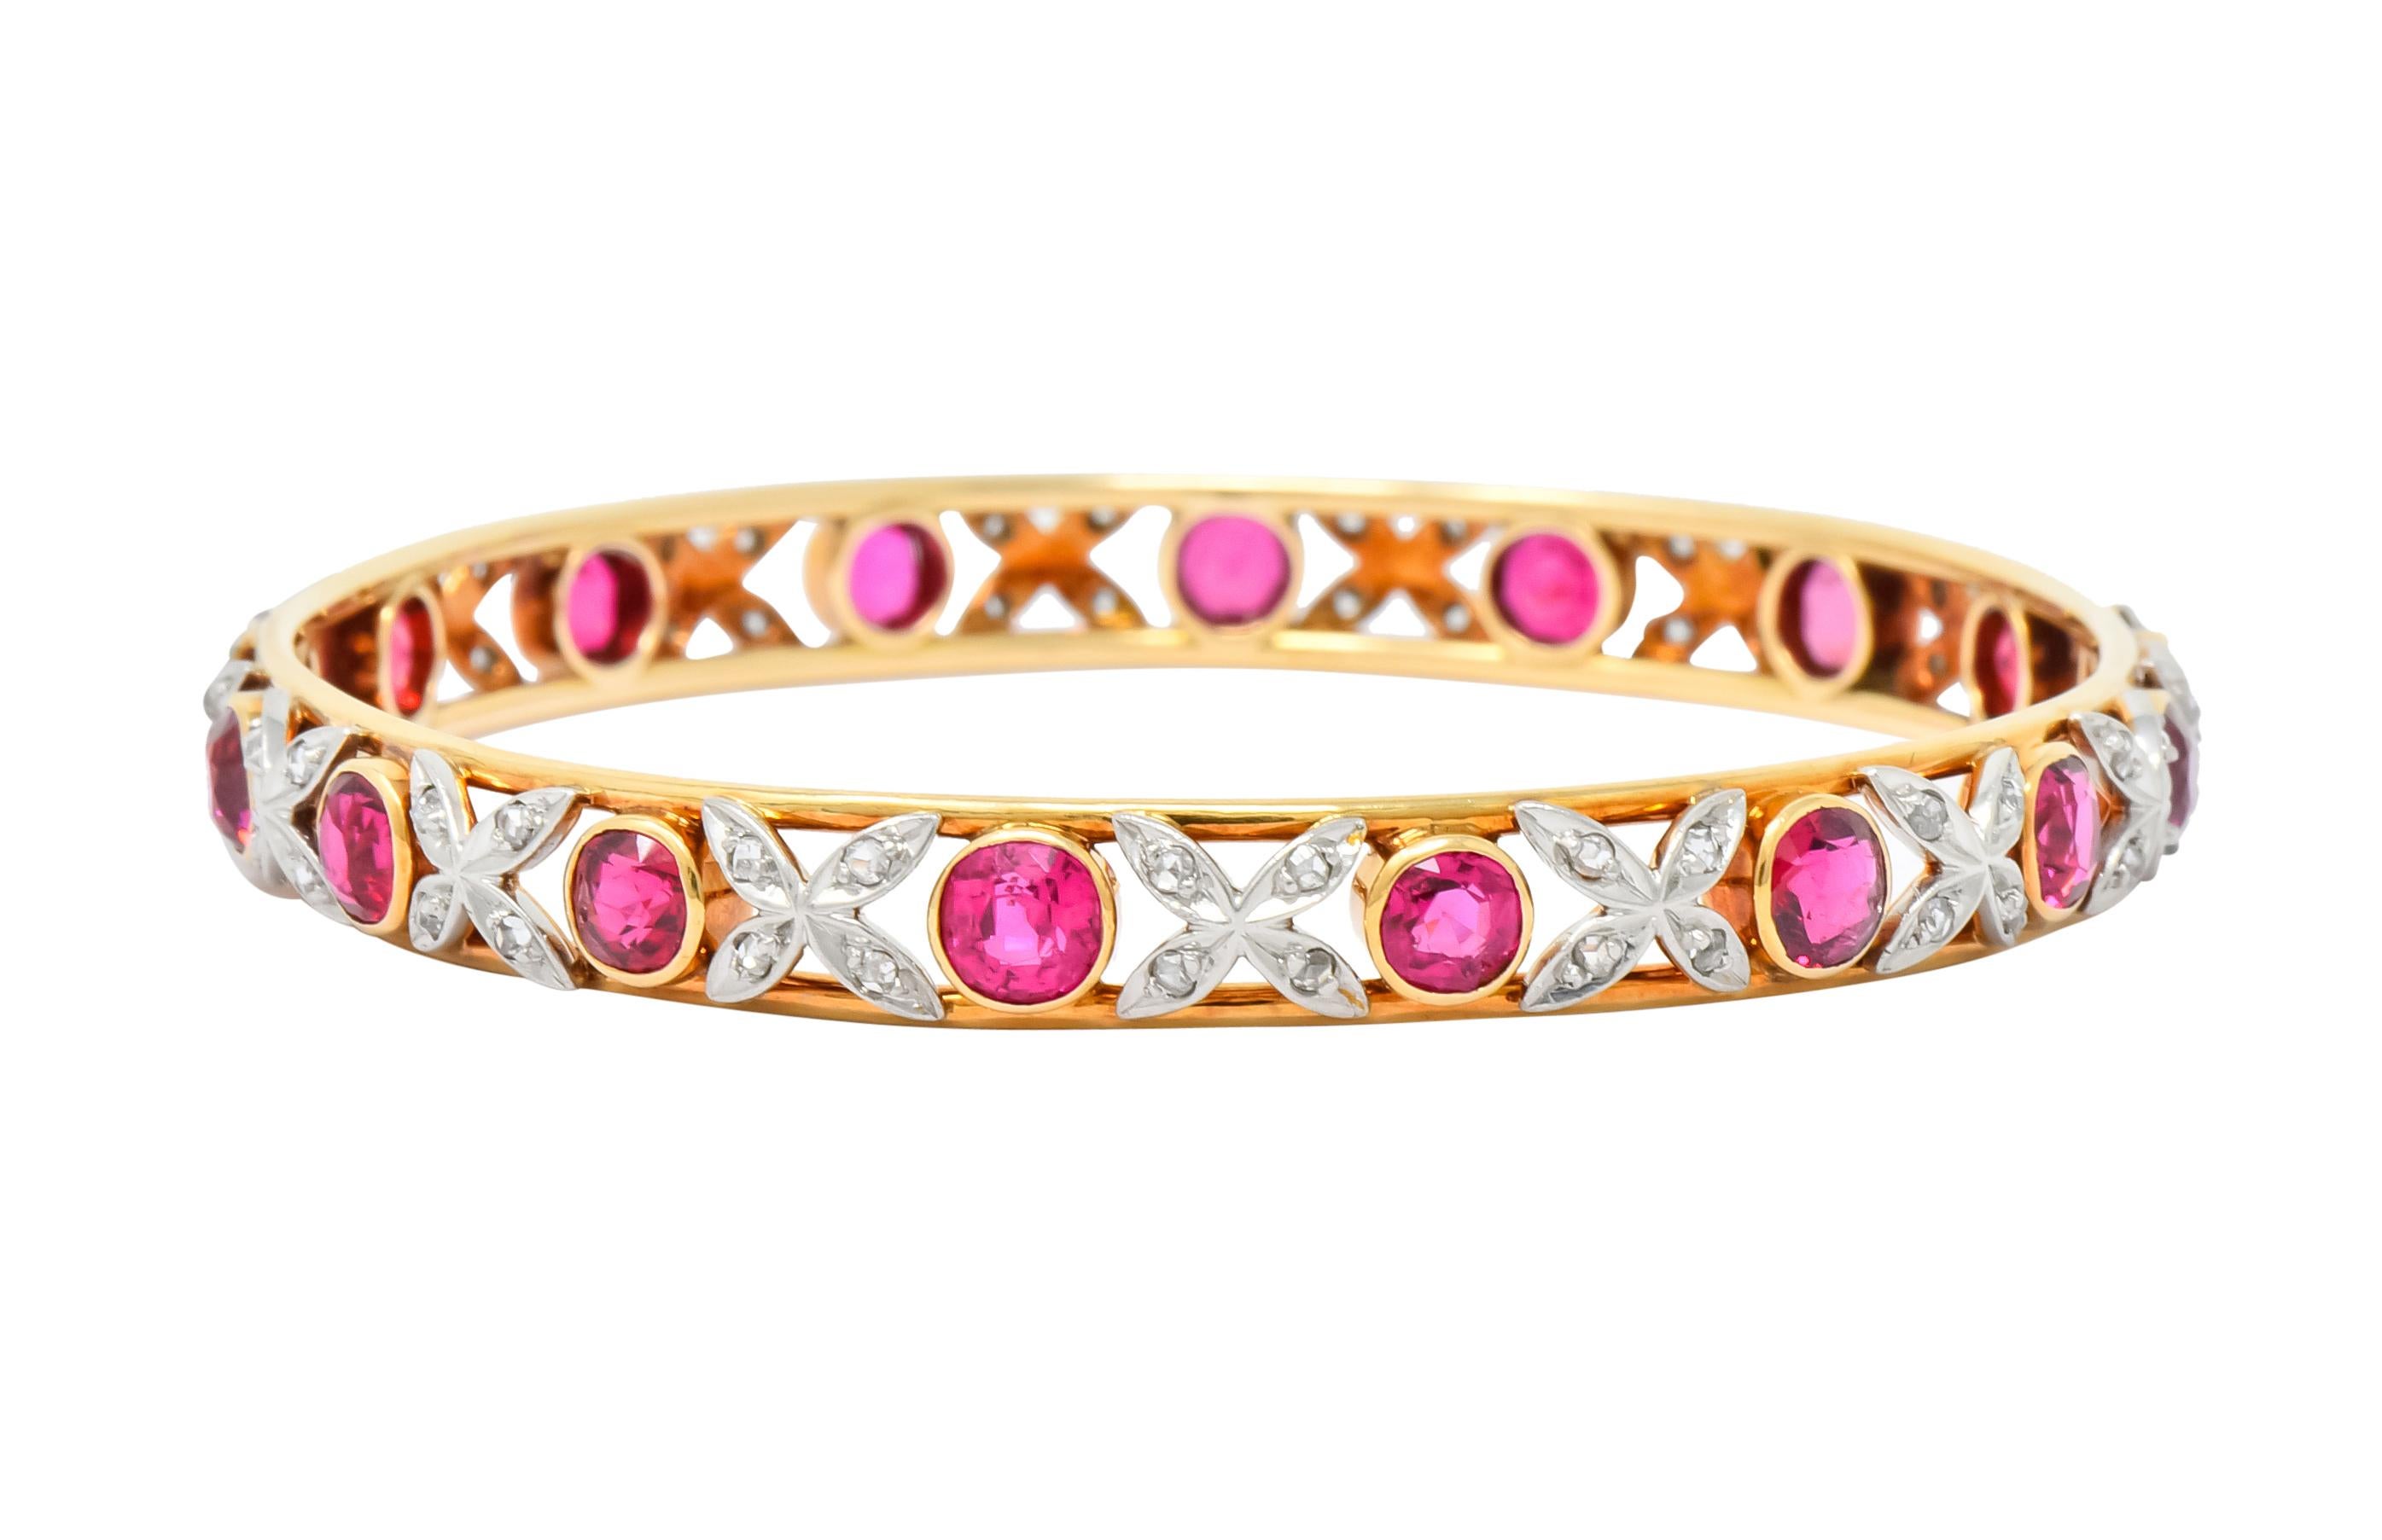 Pierced bangle bracelet with polished gold edges decorated throughout with platinum floral motif

Bezel set fully around with round cut spinel weighing approximately 9.00 carats total; raspberry to strawberry red in color - quality is consistent